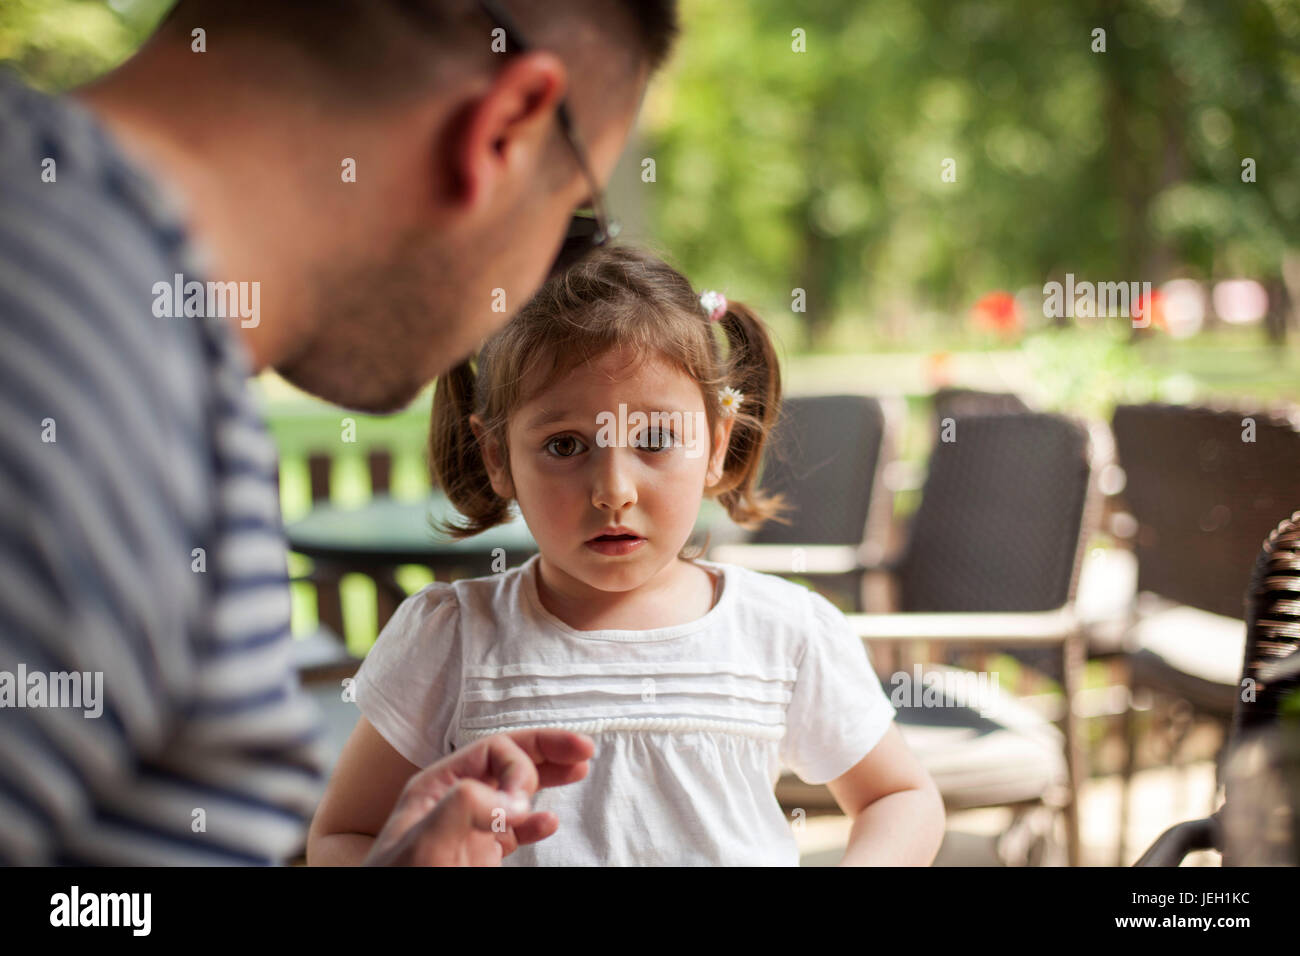 Father Shouting At Young Daughter Stock Photo